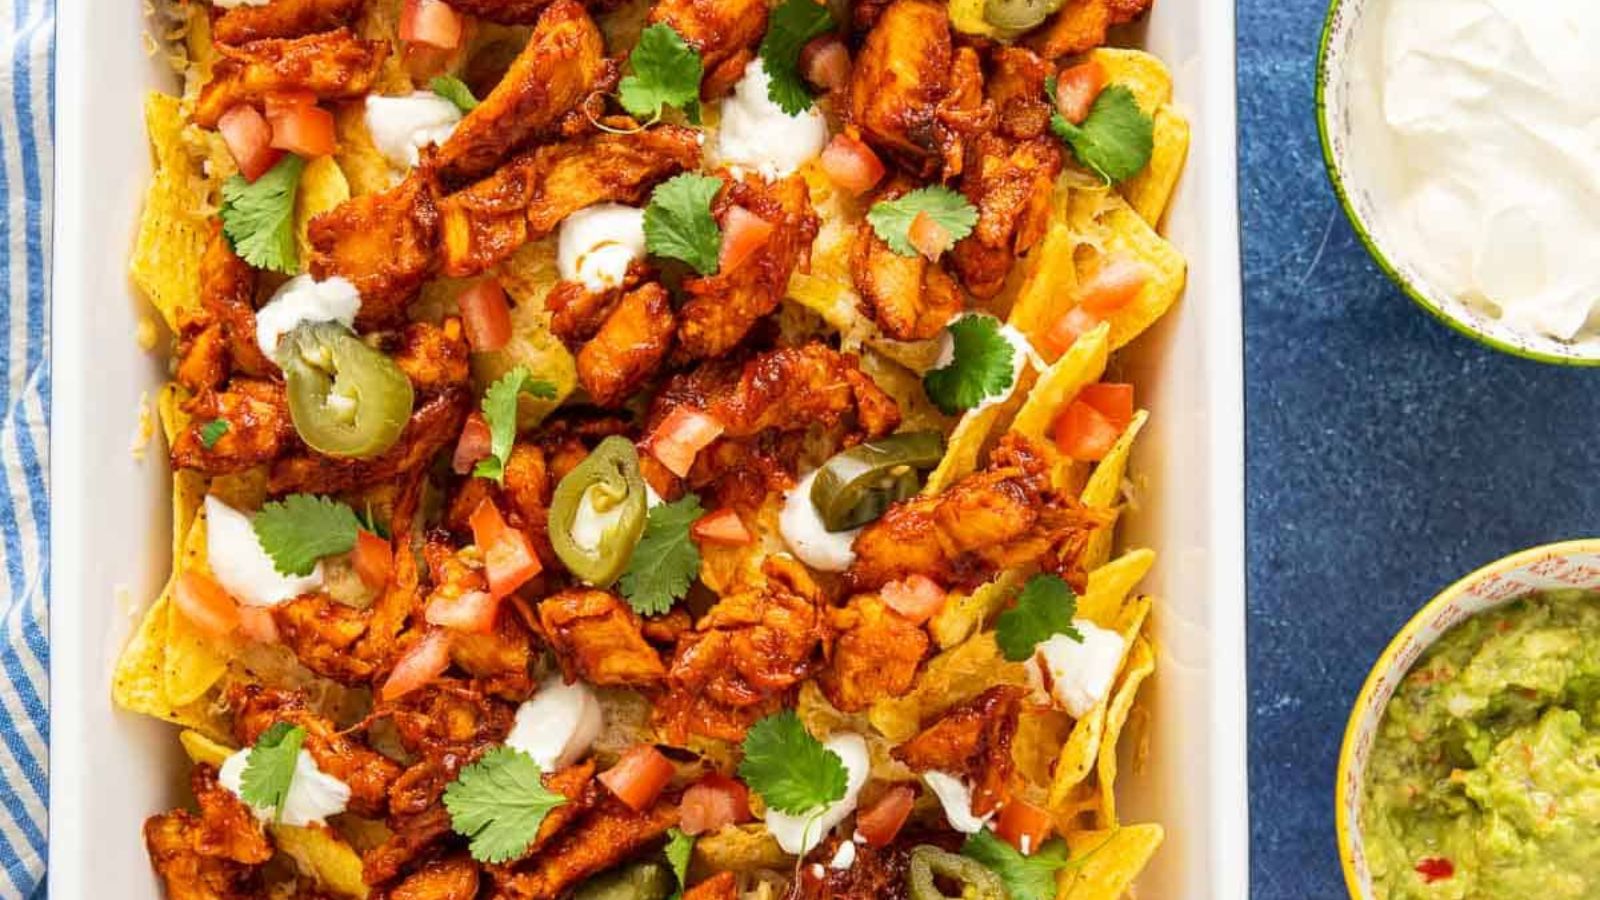 Transform Your Leftovers into 22 Lazy Day Recipes Everyone Will Love